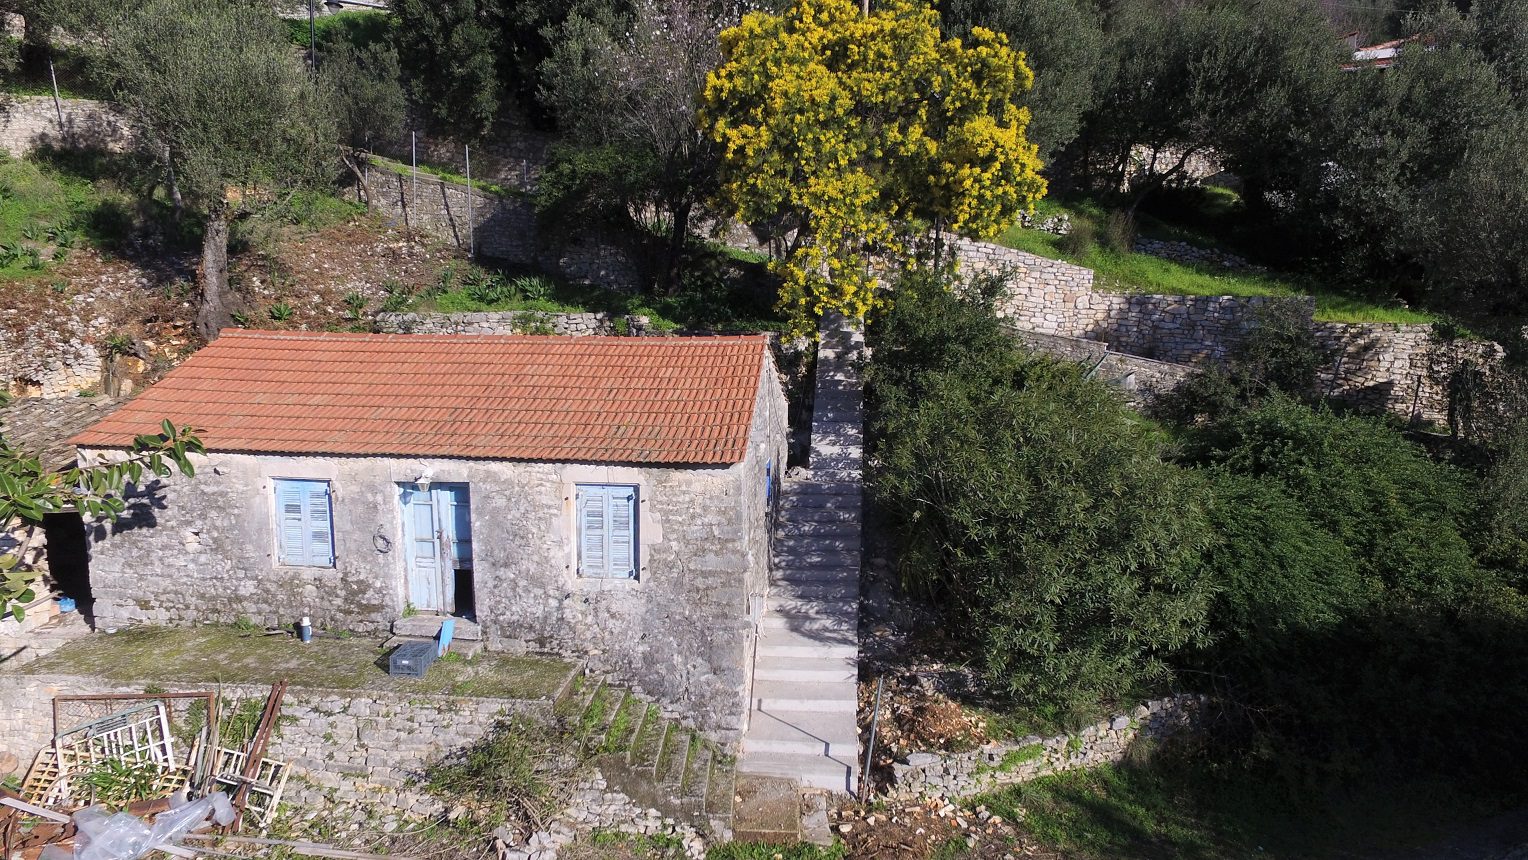 Aerial views of house for sale on Ithaca Greece, Kioni